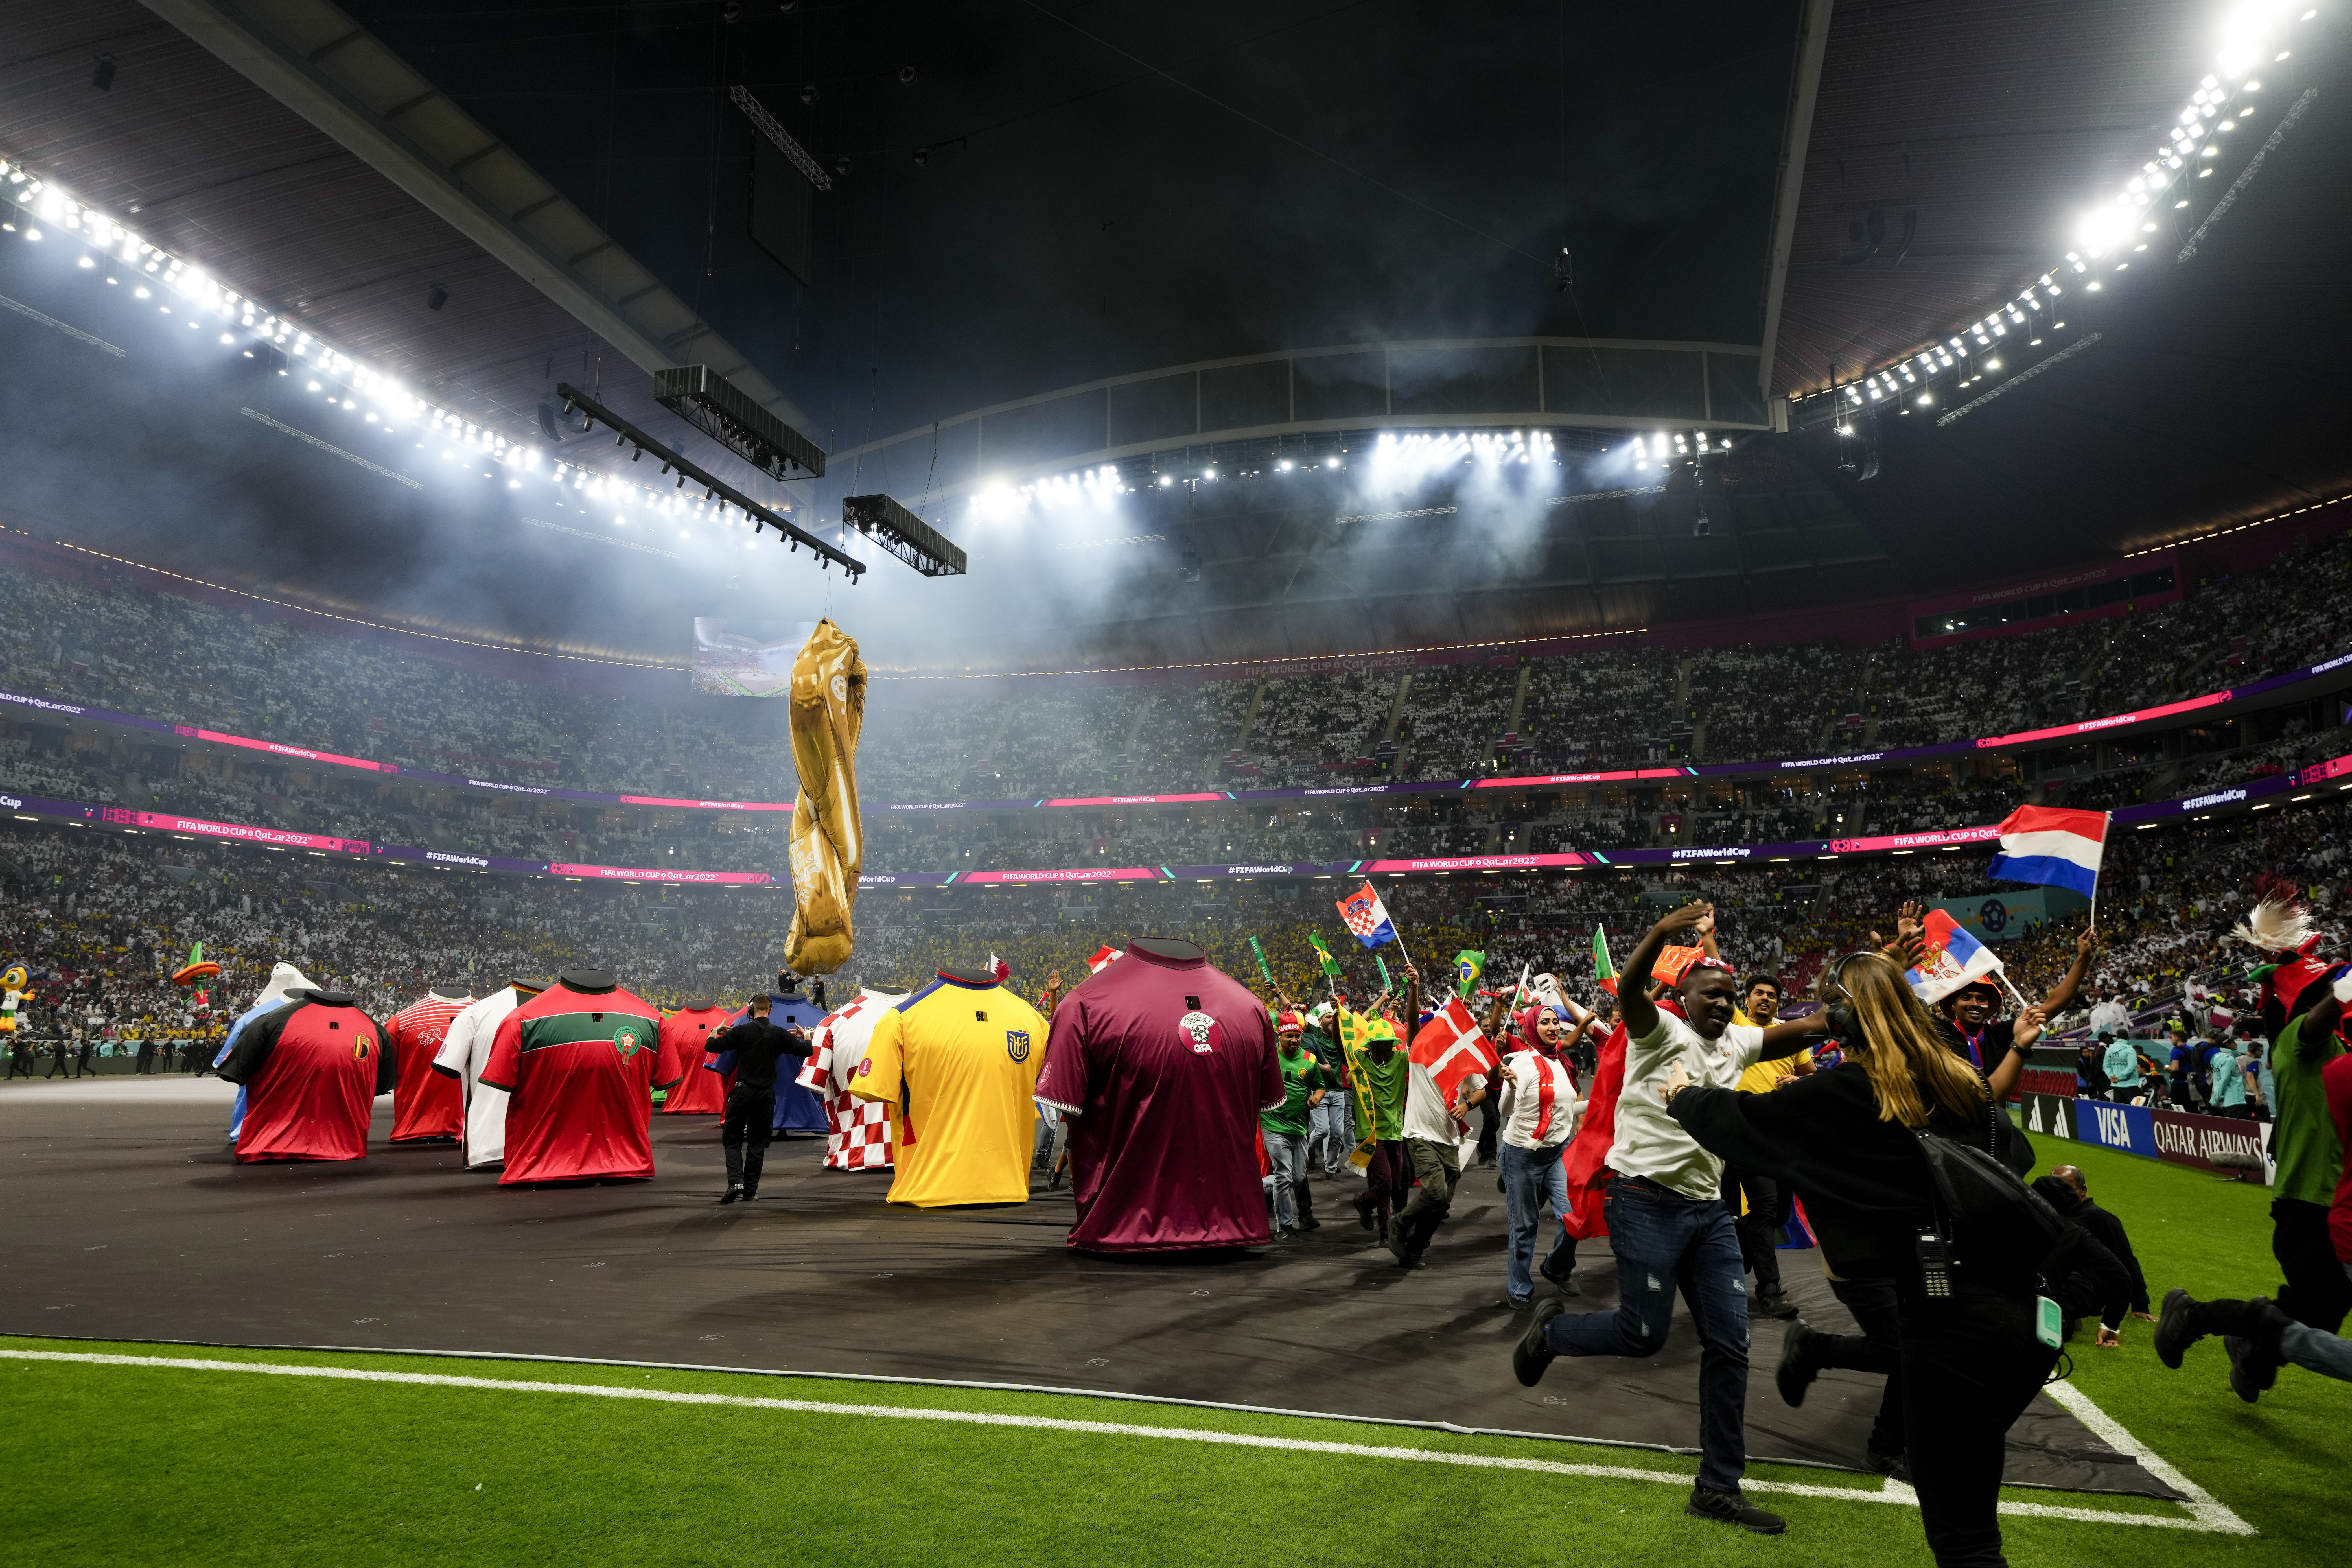 Qatar 2022: World Cup brings Arab world together after years of discontent  - The Week